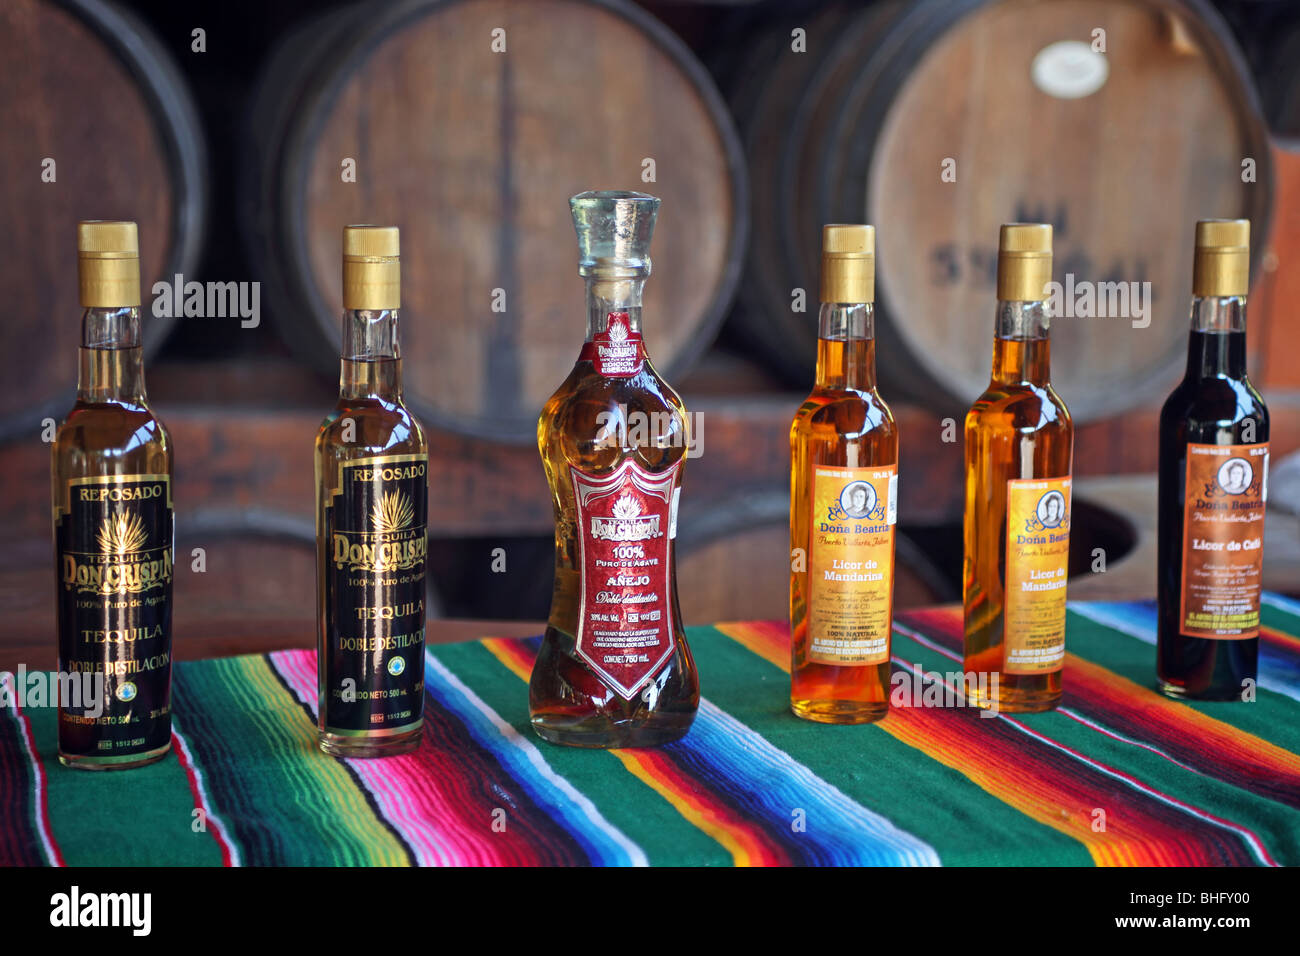 Tequila alcohol in bottles at distillery near Puerto Vallarta, Mexico. Colorful bottles on Mexican blanket in front of barrels. Stock Photo